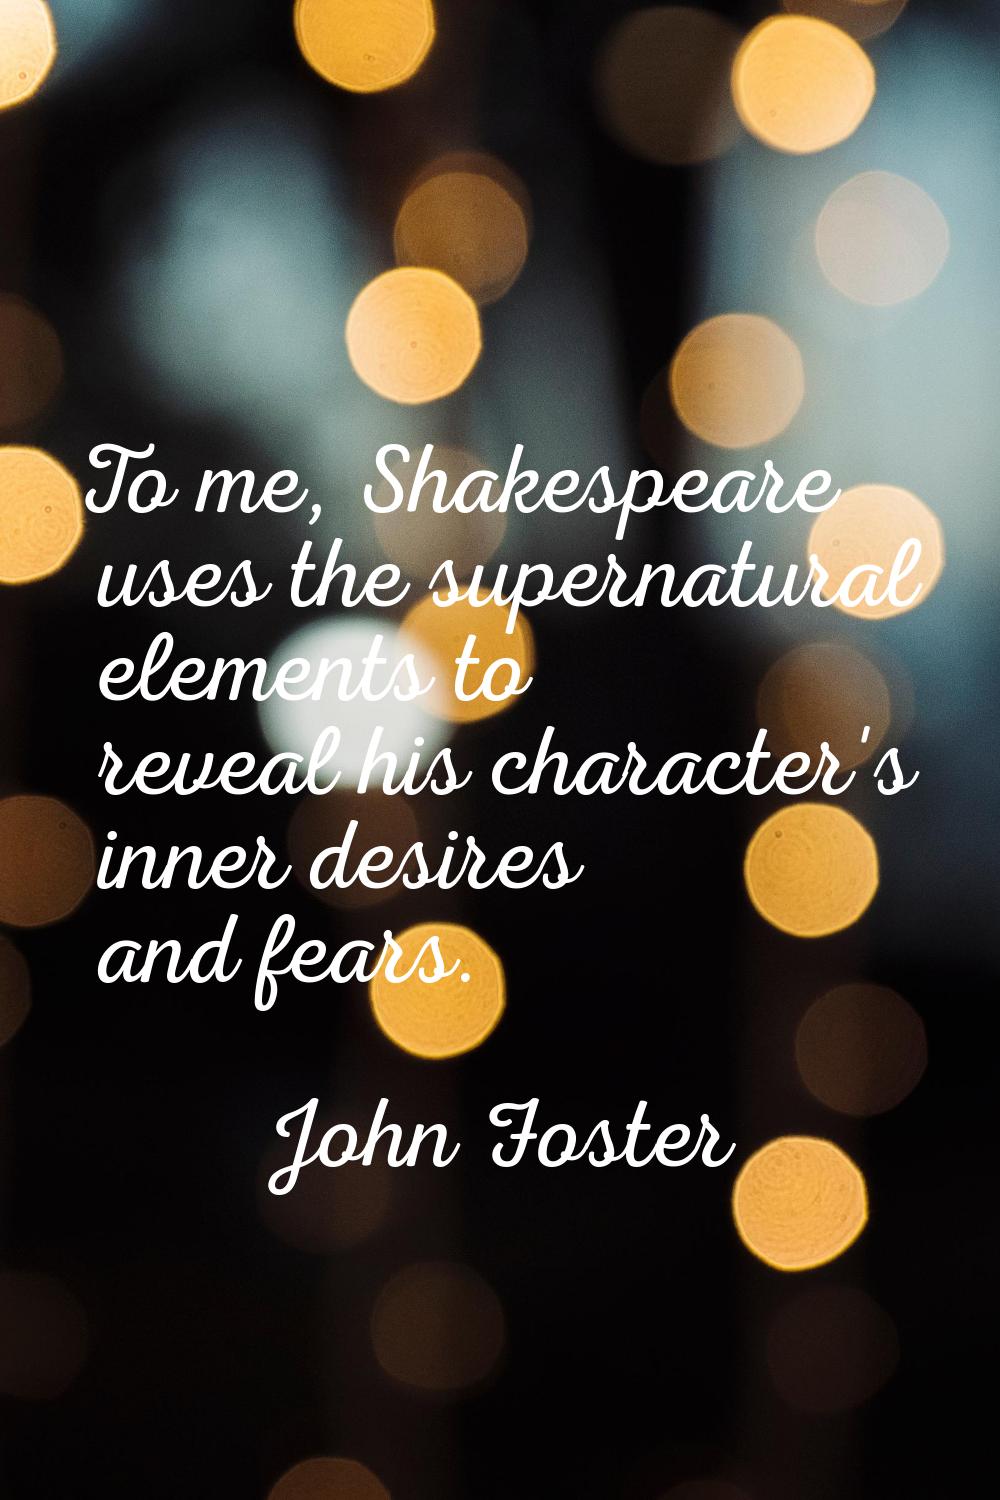 To me, Shakespeare uses the supernatural elements to reveal his character's inner desires and fears